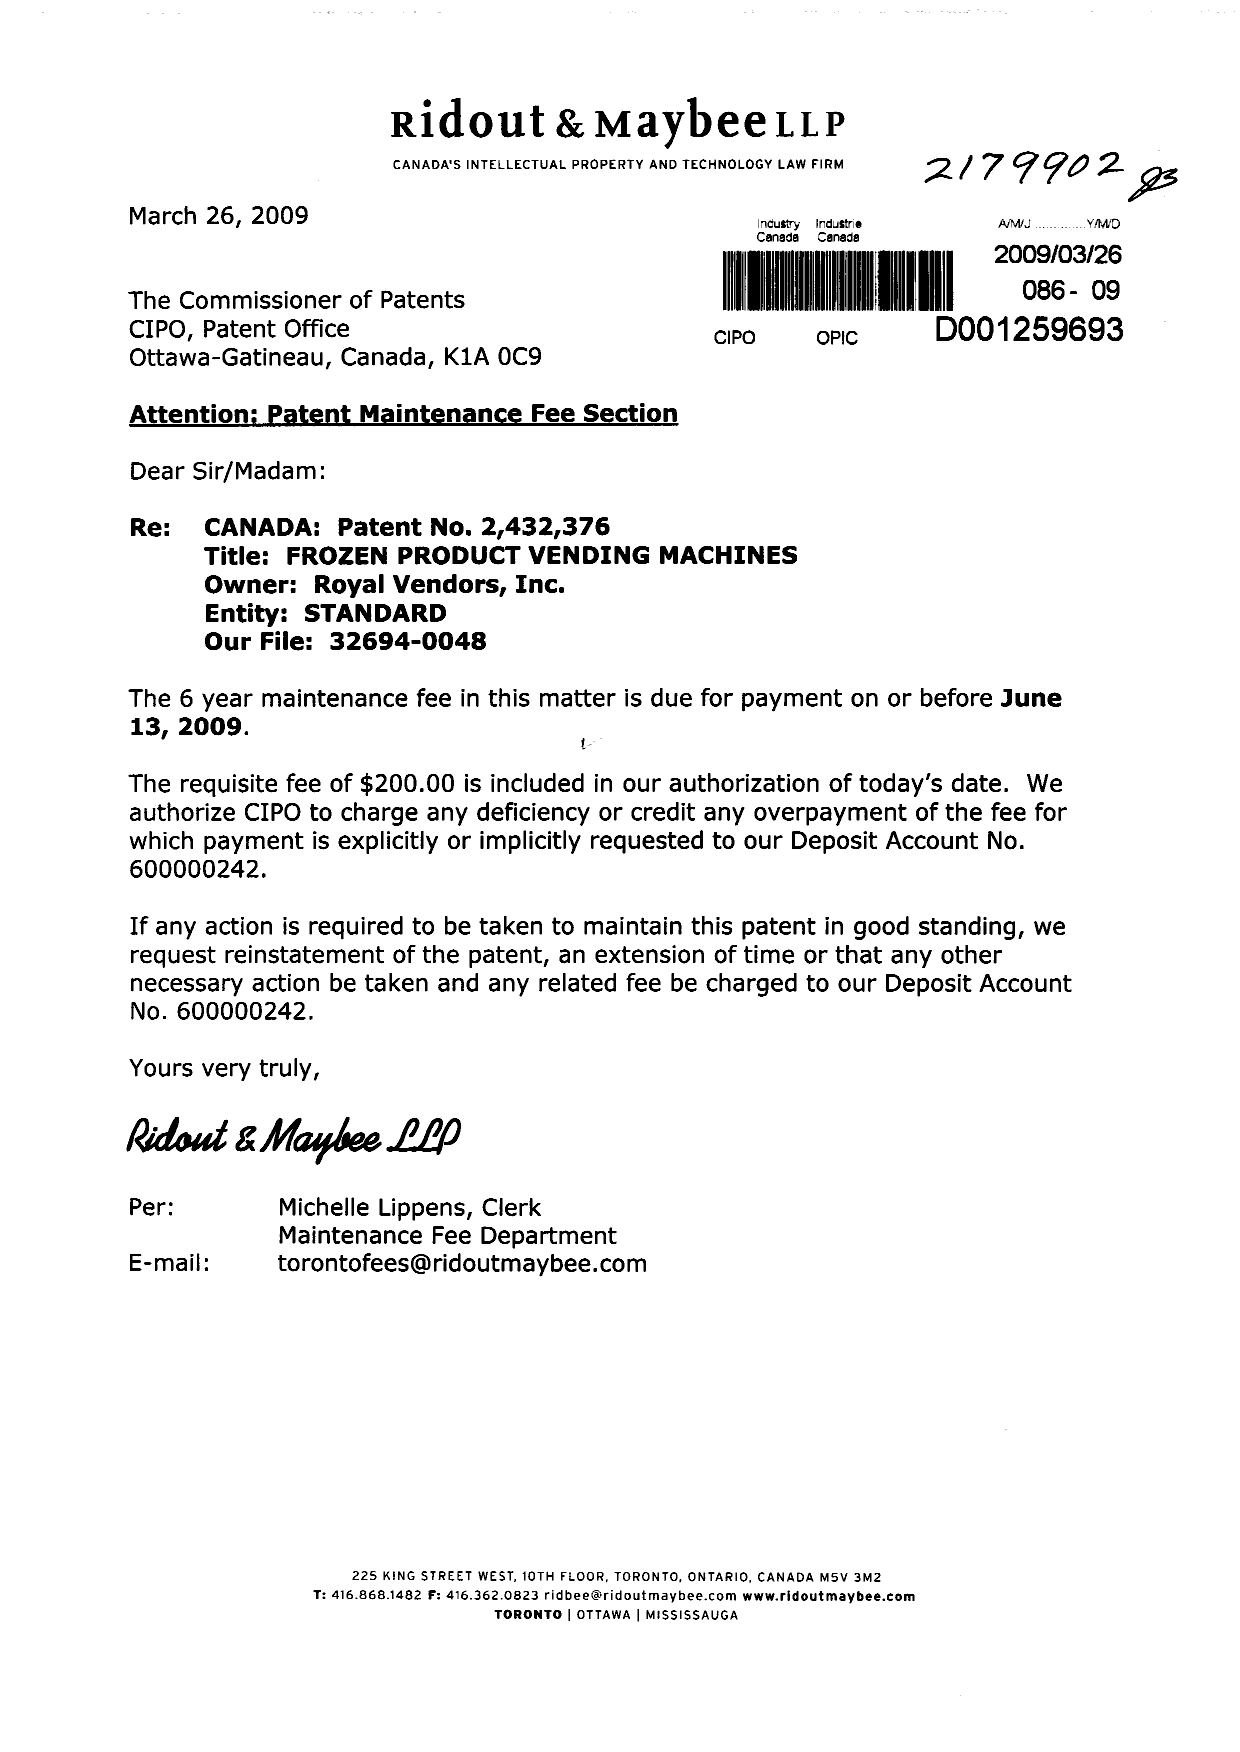 Canadian Patent Document 2432376. Fees 20090326. Image 1 of 1